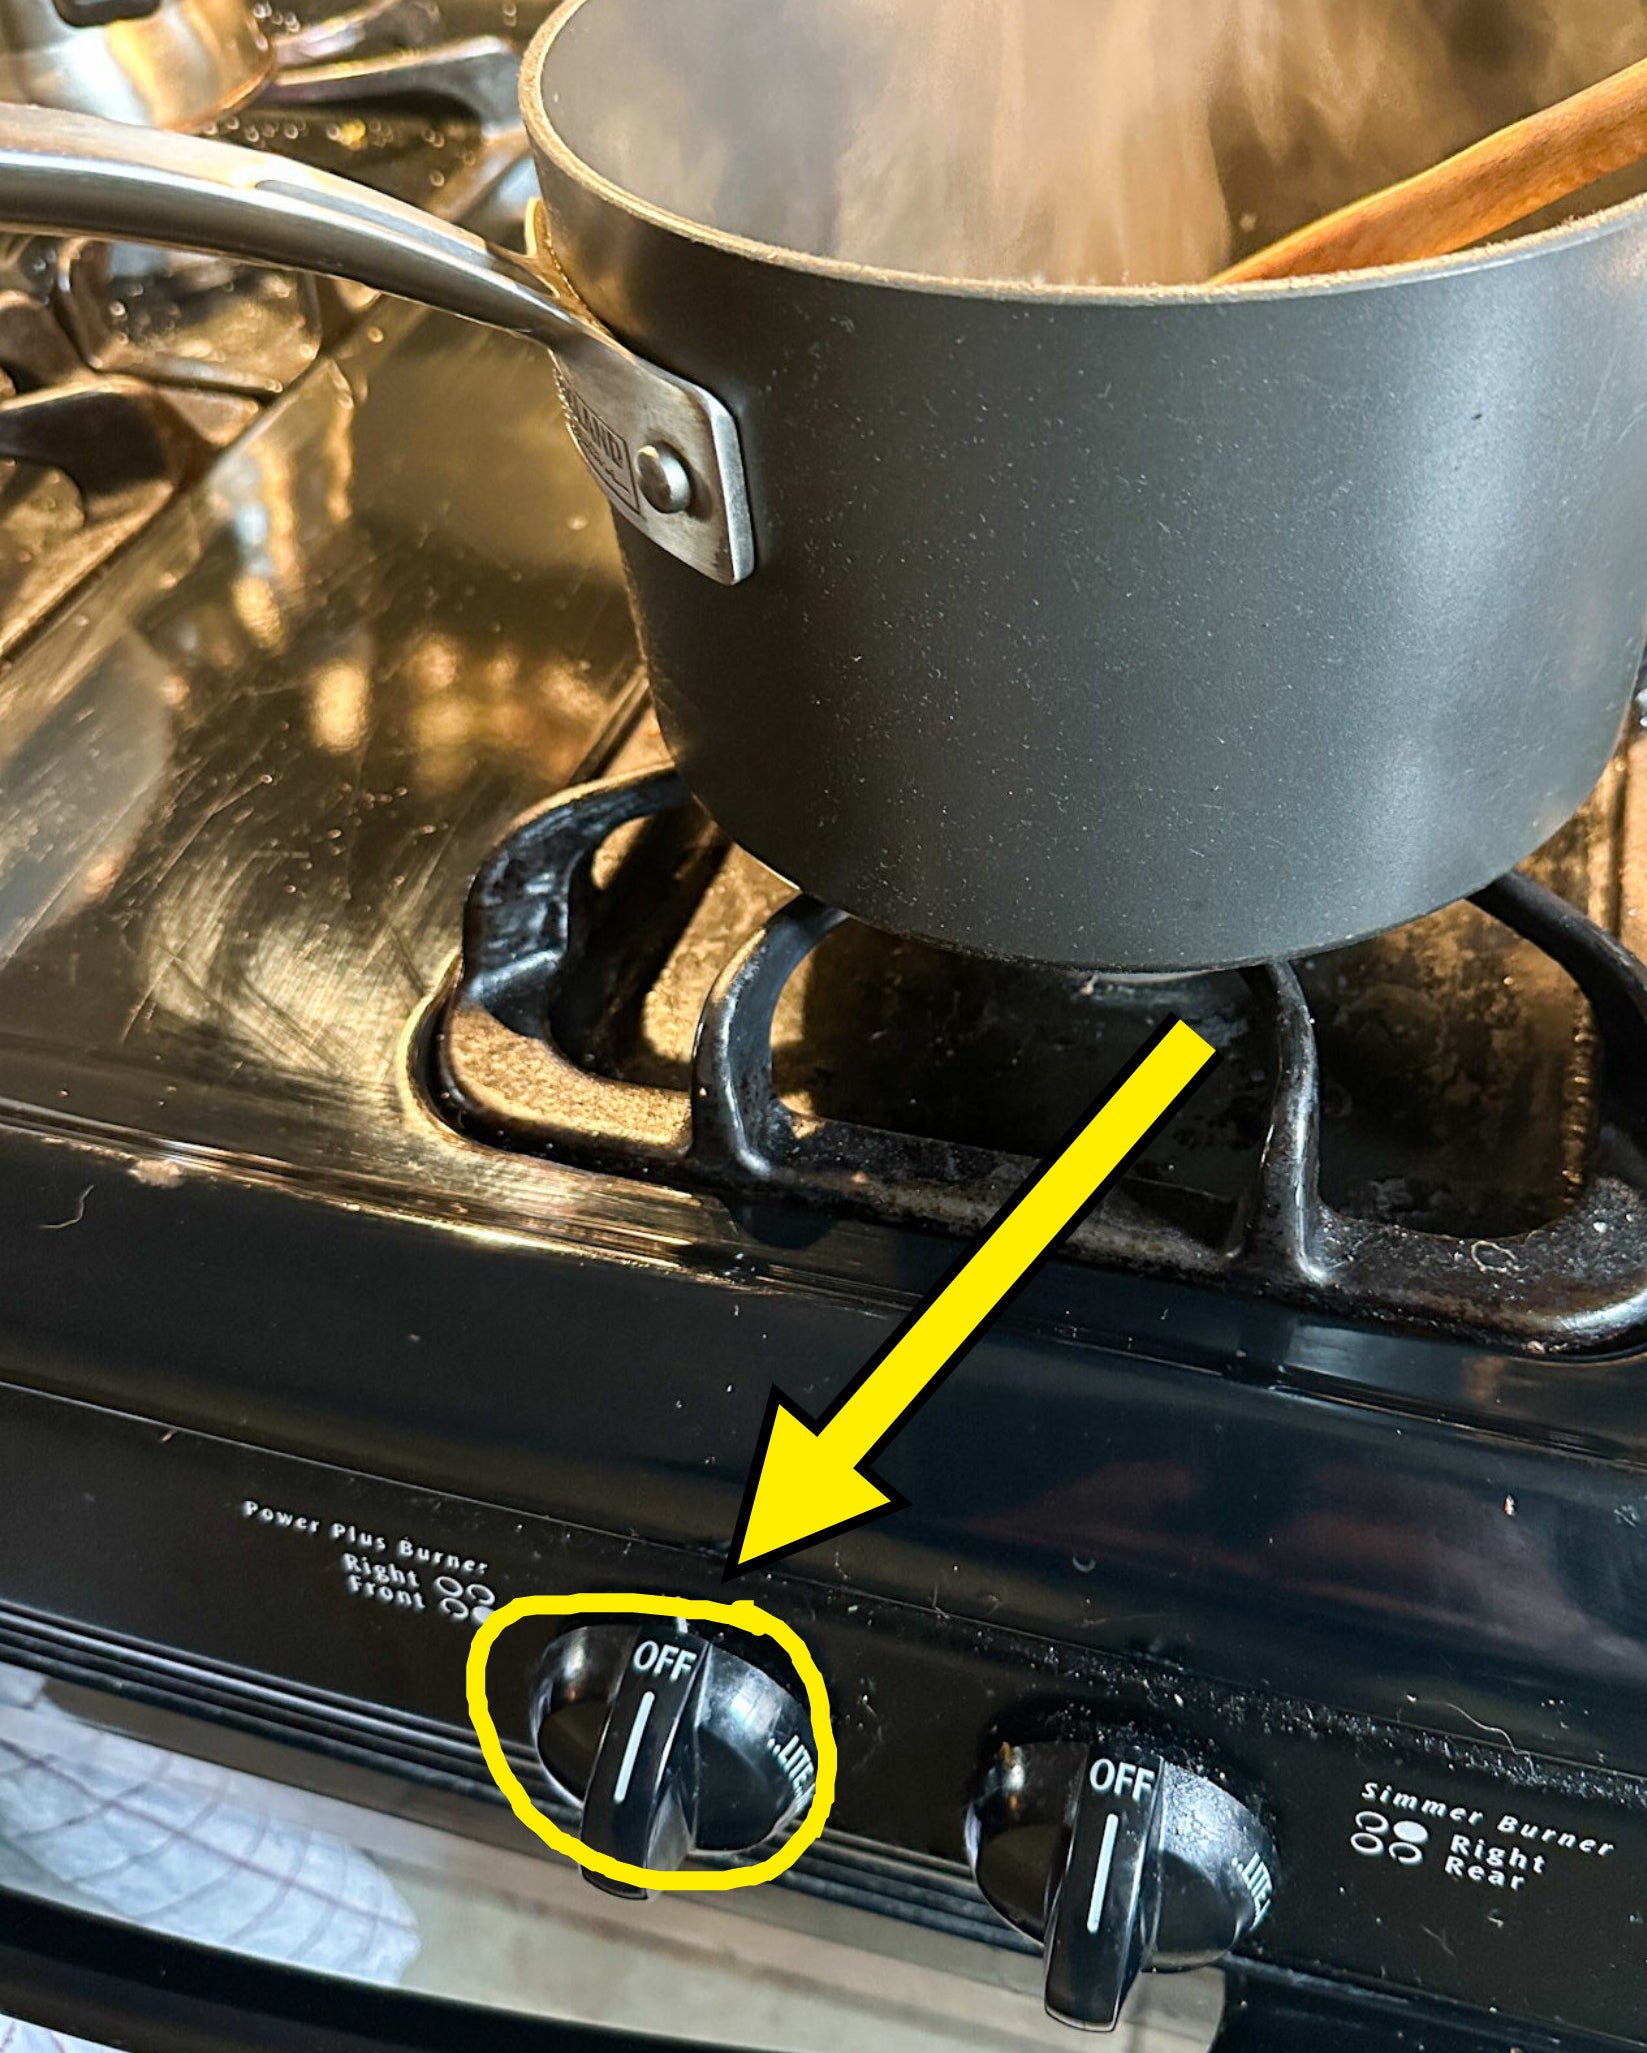 arrow pointing to the stove turned to the off position in front of a boiling saucepan of pastina